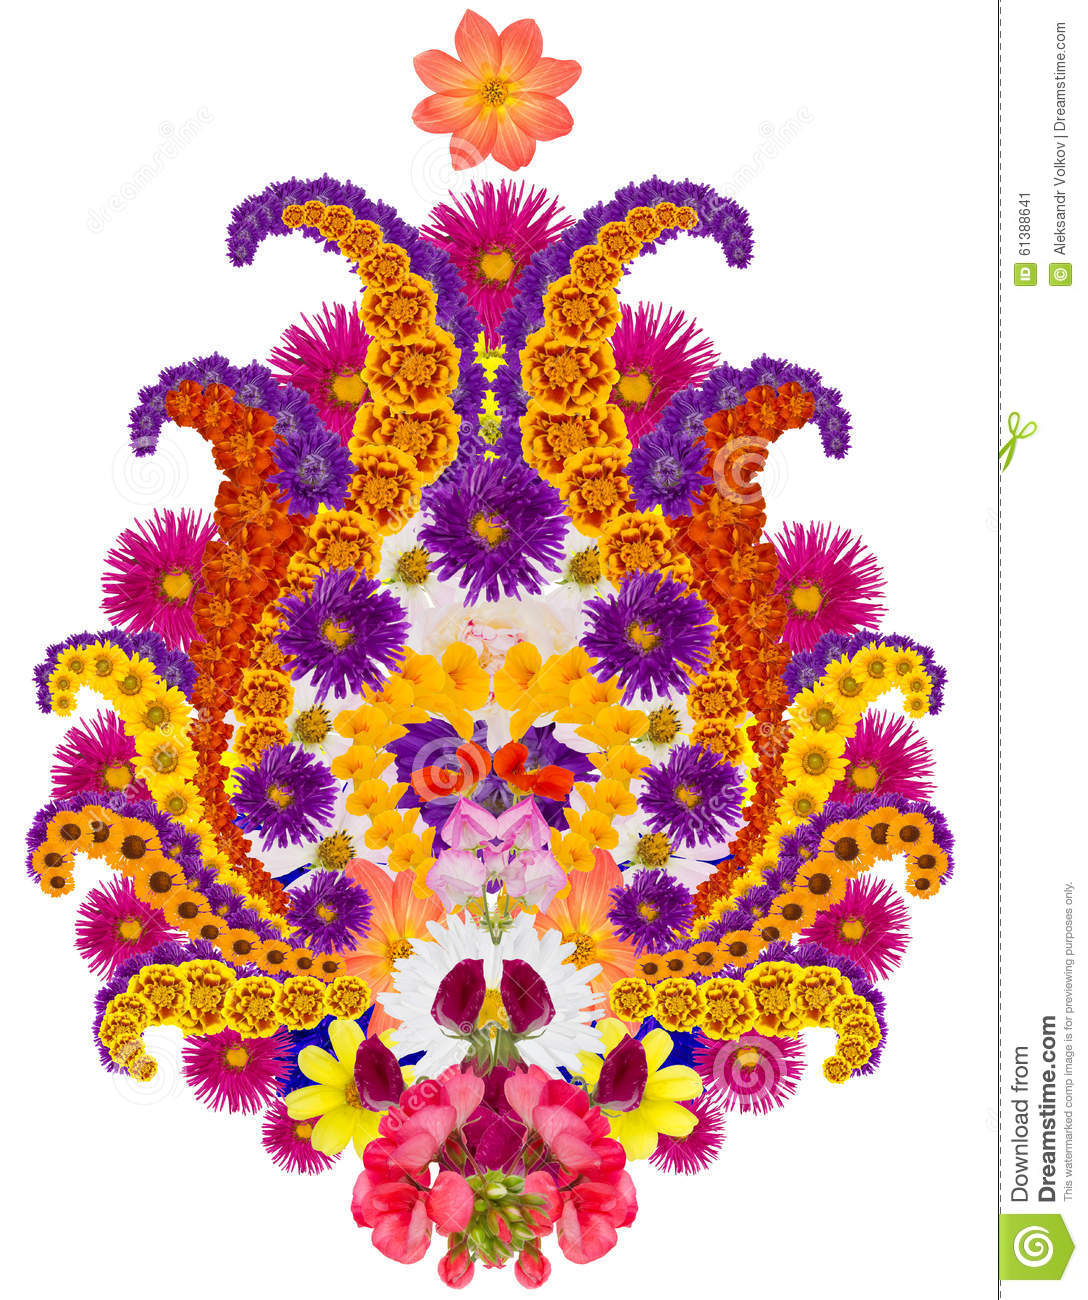 Basic Element Of The Persian Carpet Rug  A Spring Flower Of